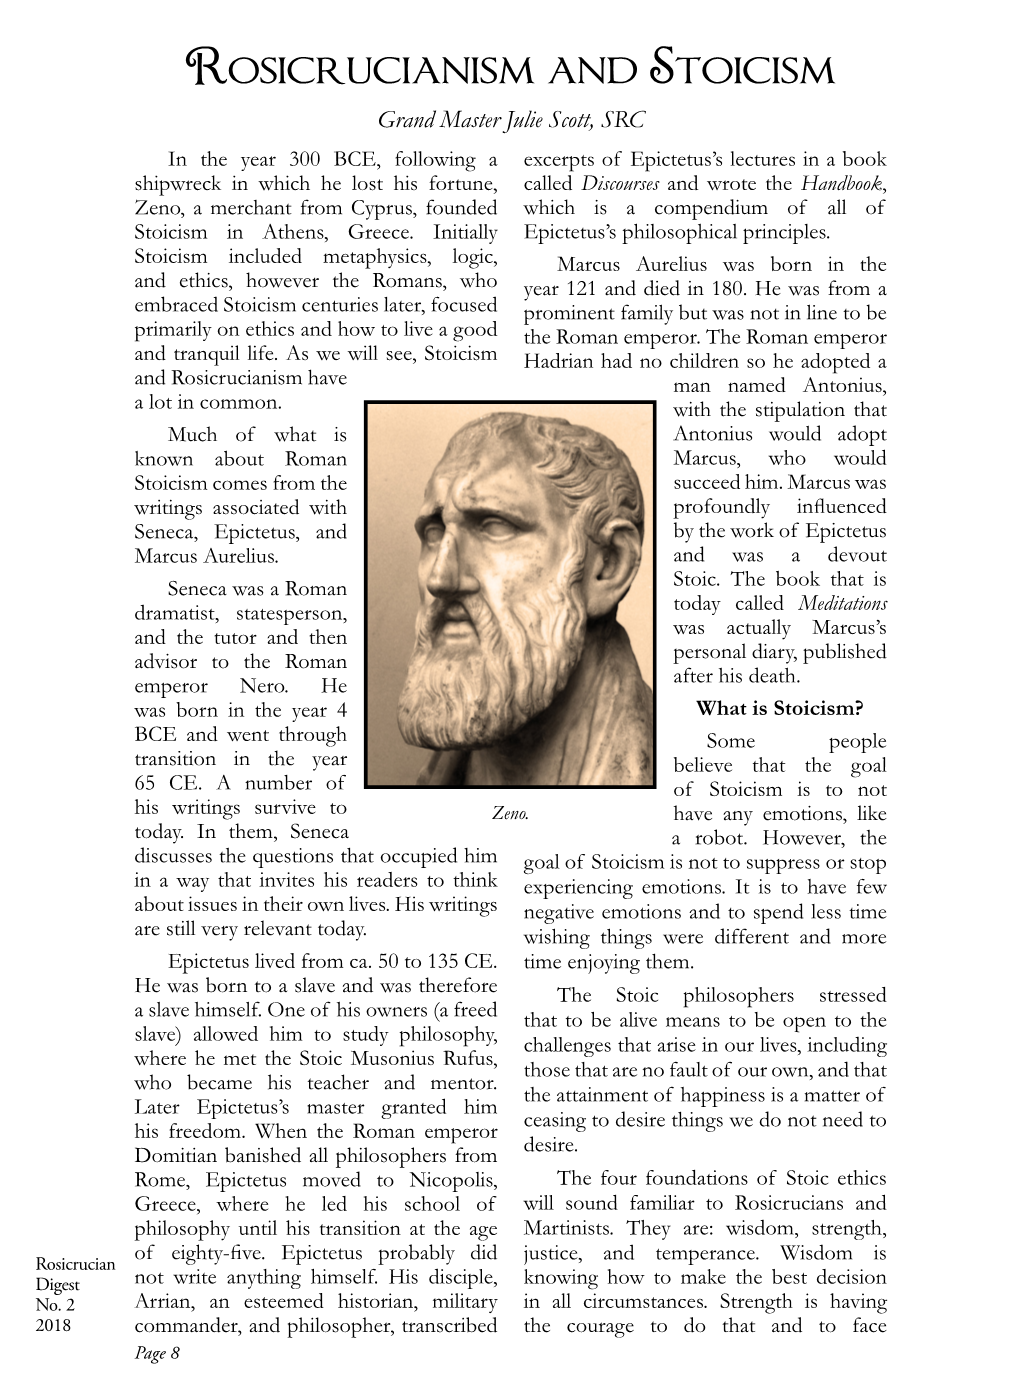 Rosicrucianism and Stoicism